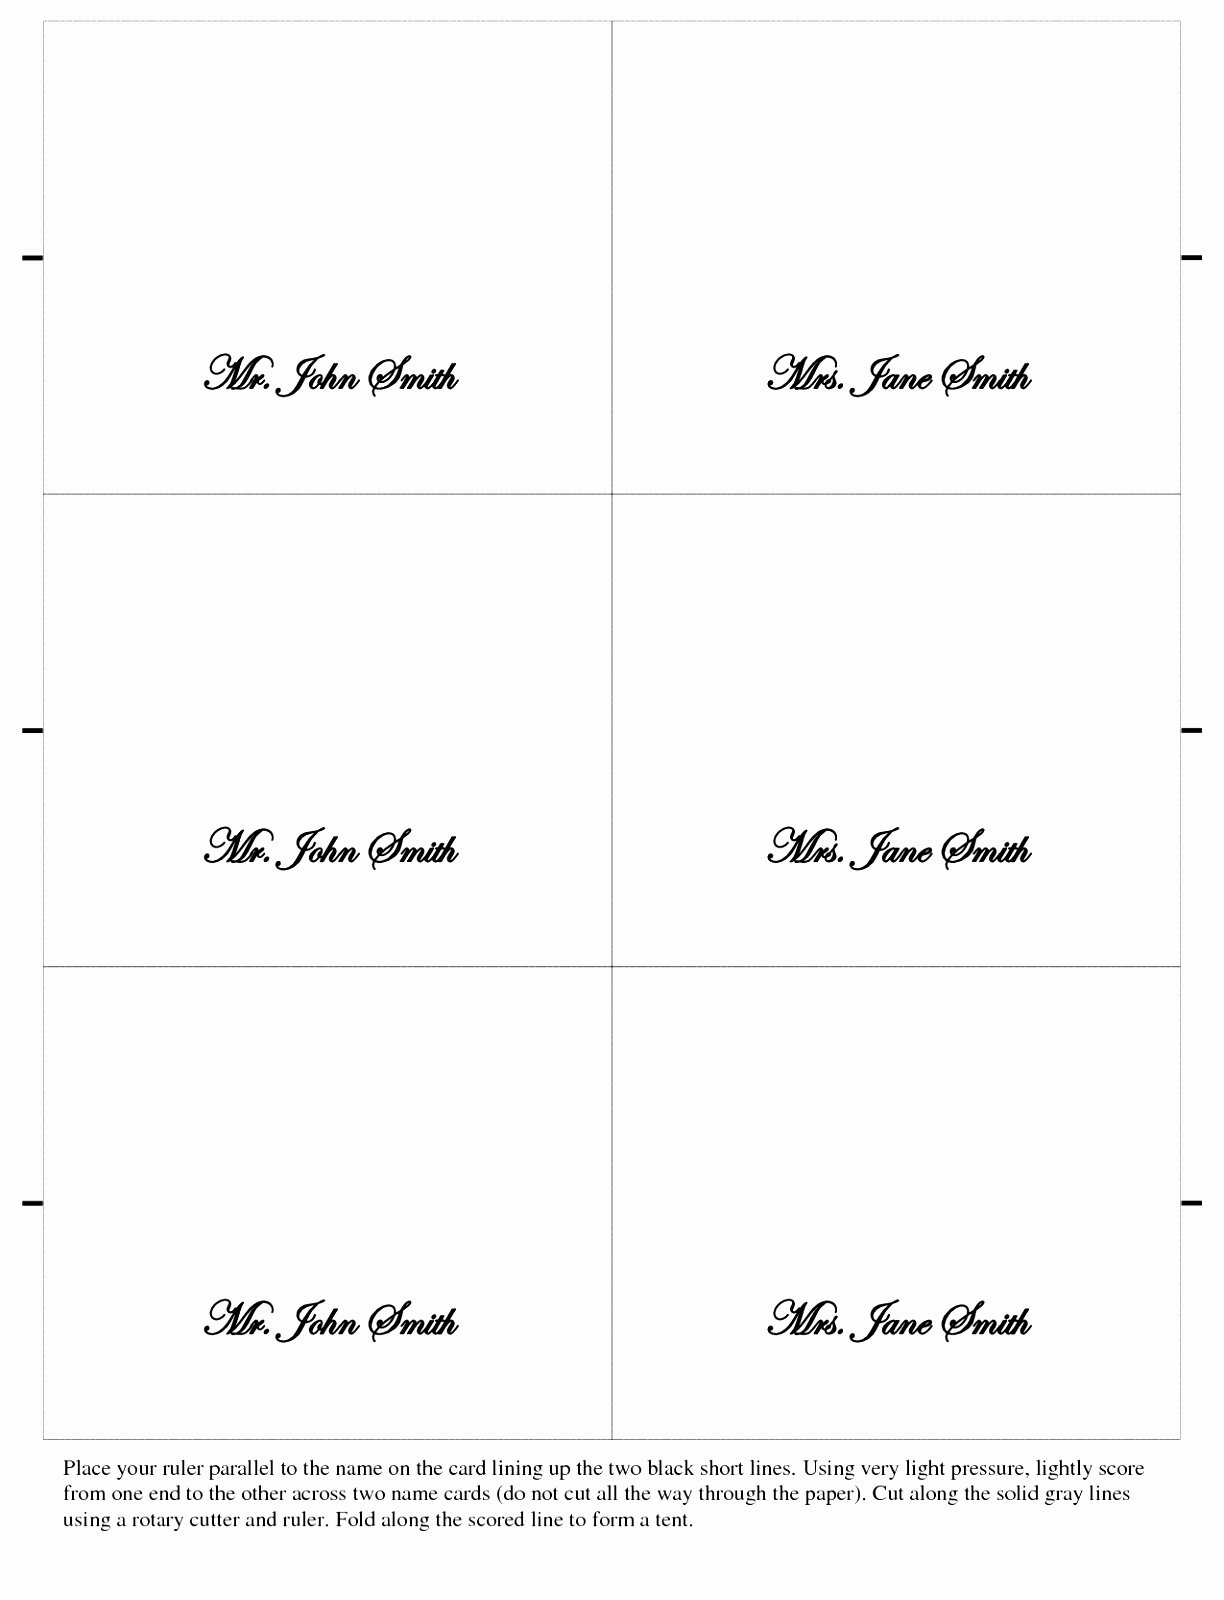 Place Cards Template 6 Per Sheet Lovely 9 Place Card Template Word 6 Per Sheet Puiwy